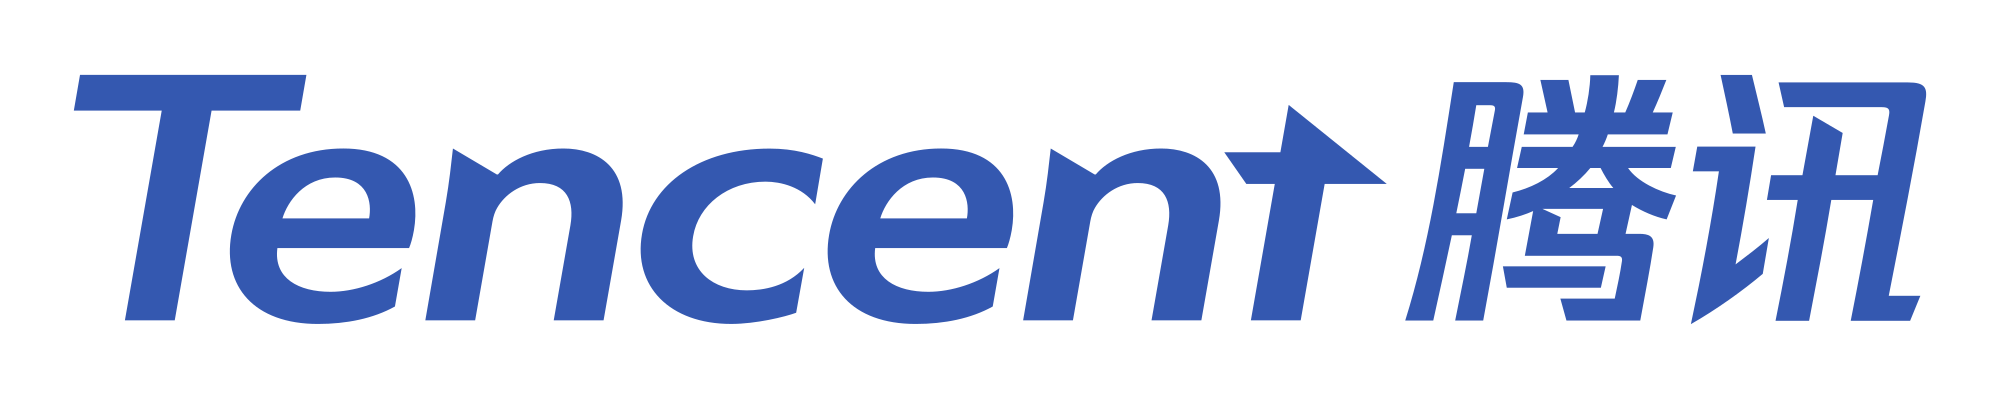 Tencent Logo - File:Tencent Logo.svg - Wikimedia Commons